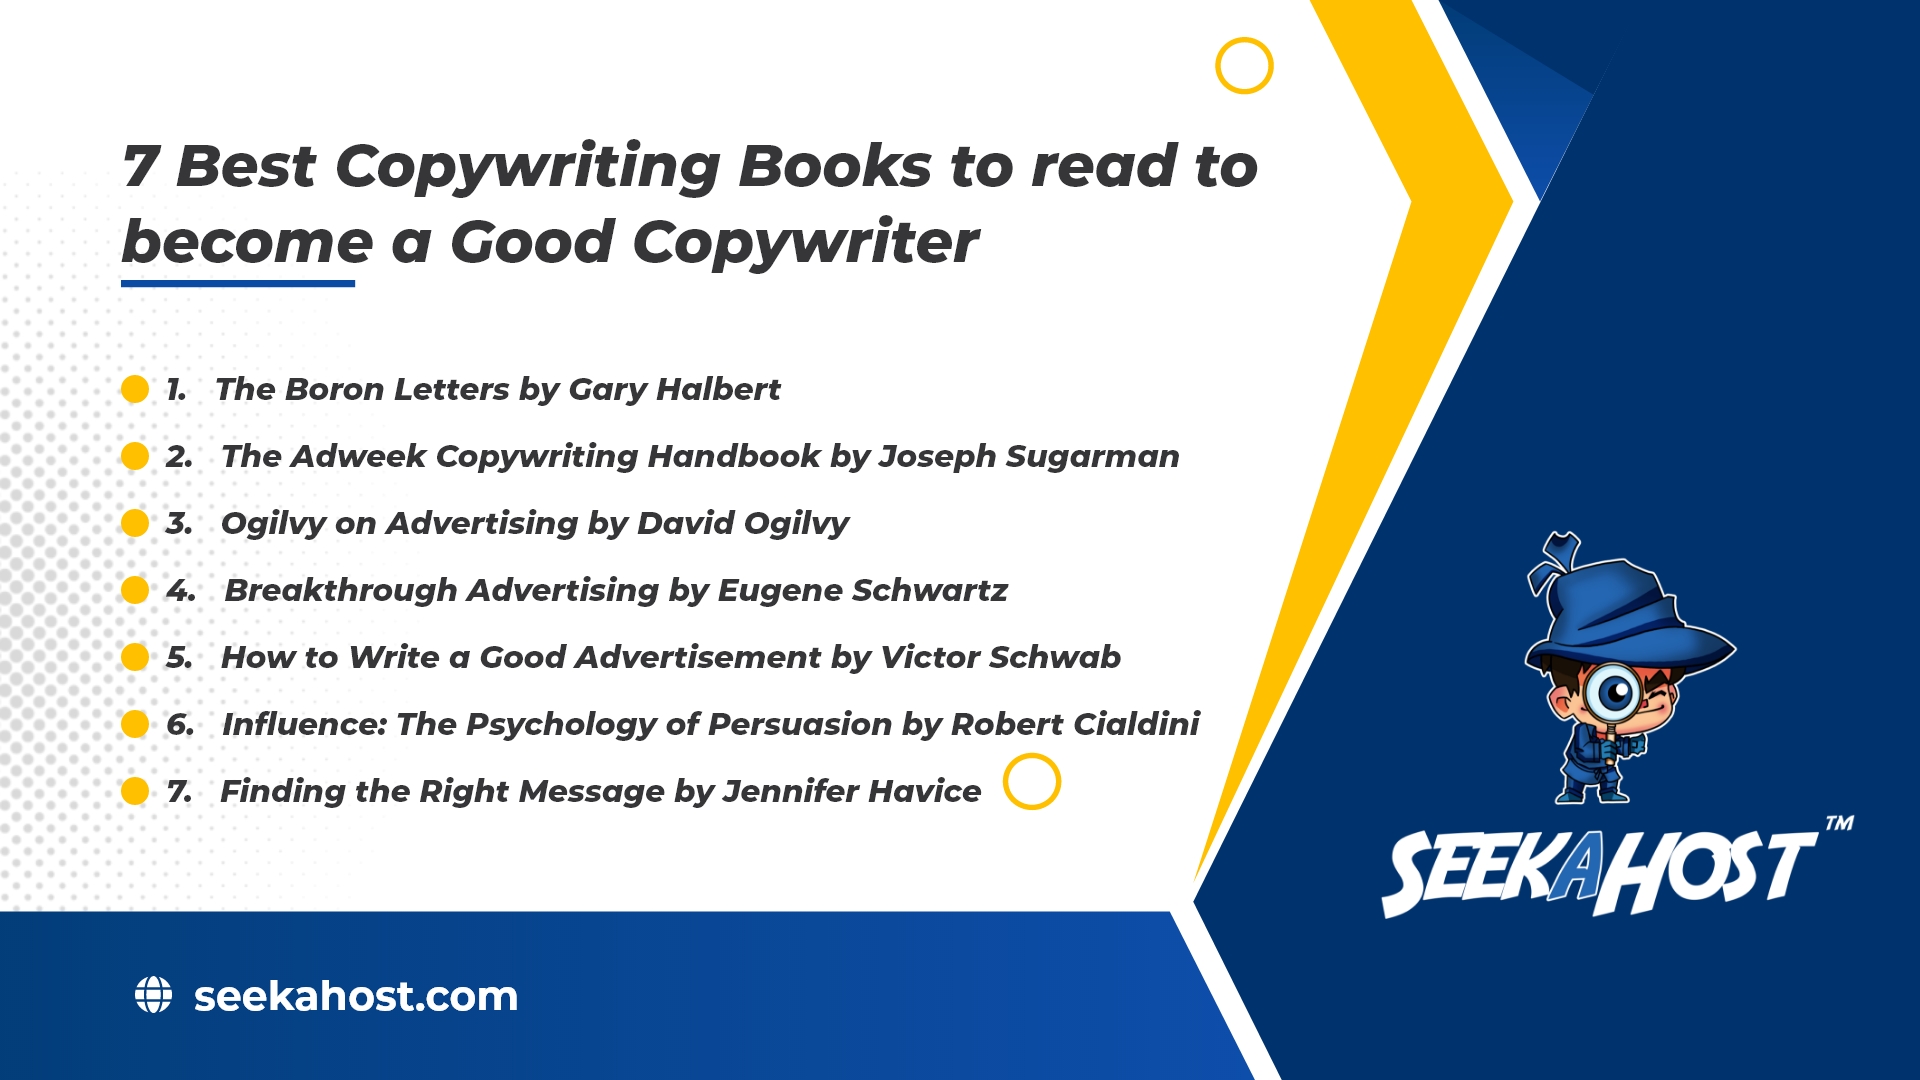 7-best-copywriting-books-to-read-to-become-a-good-copywriter